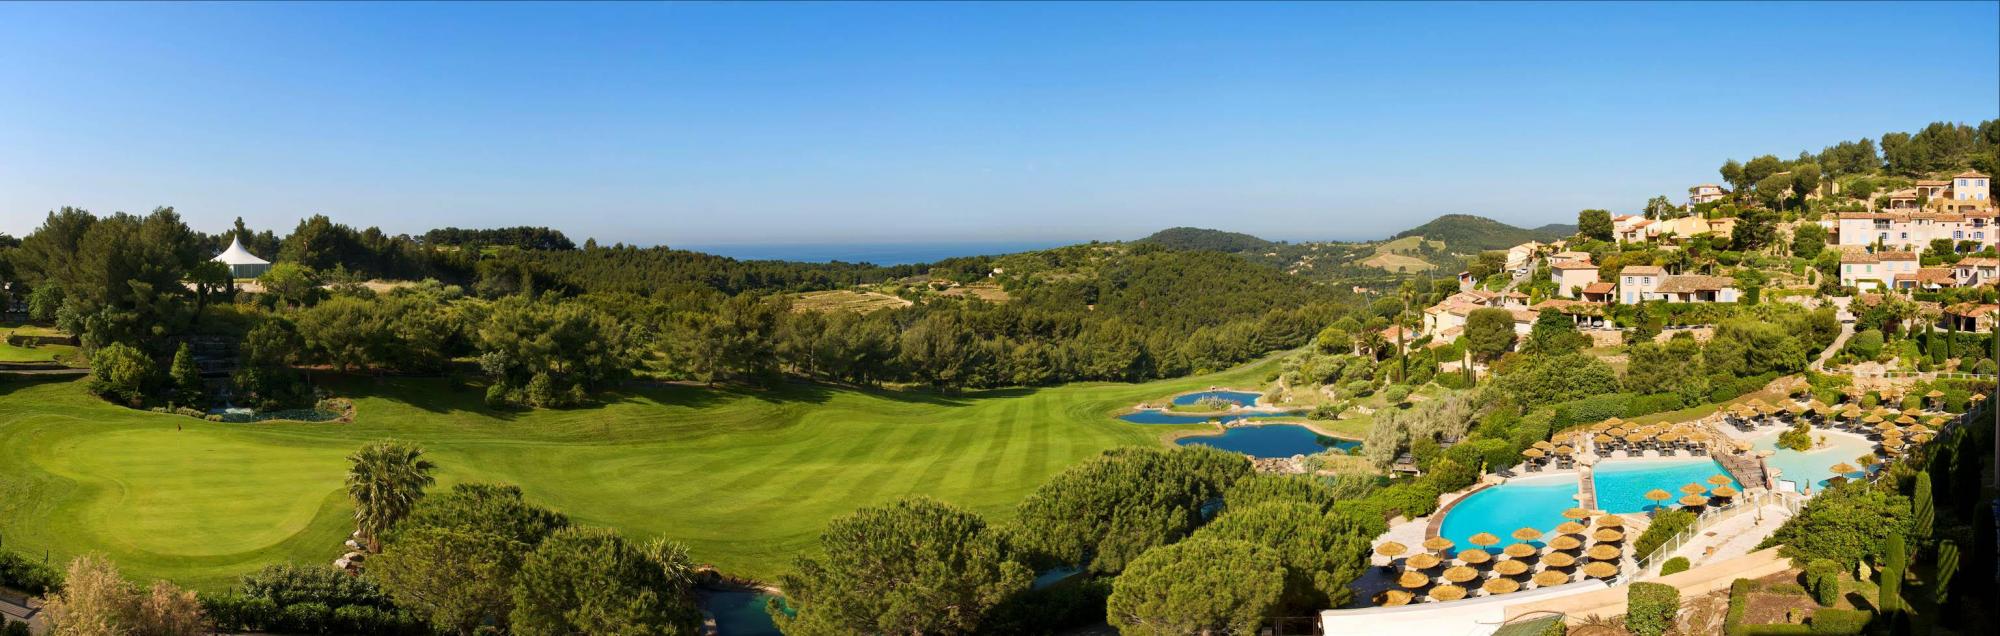 All The Golf Dolce Fregate Provence's scenic golf course in spectacular South of France.